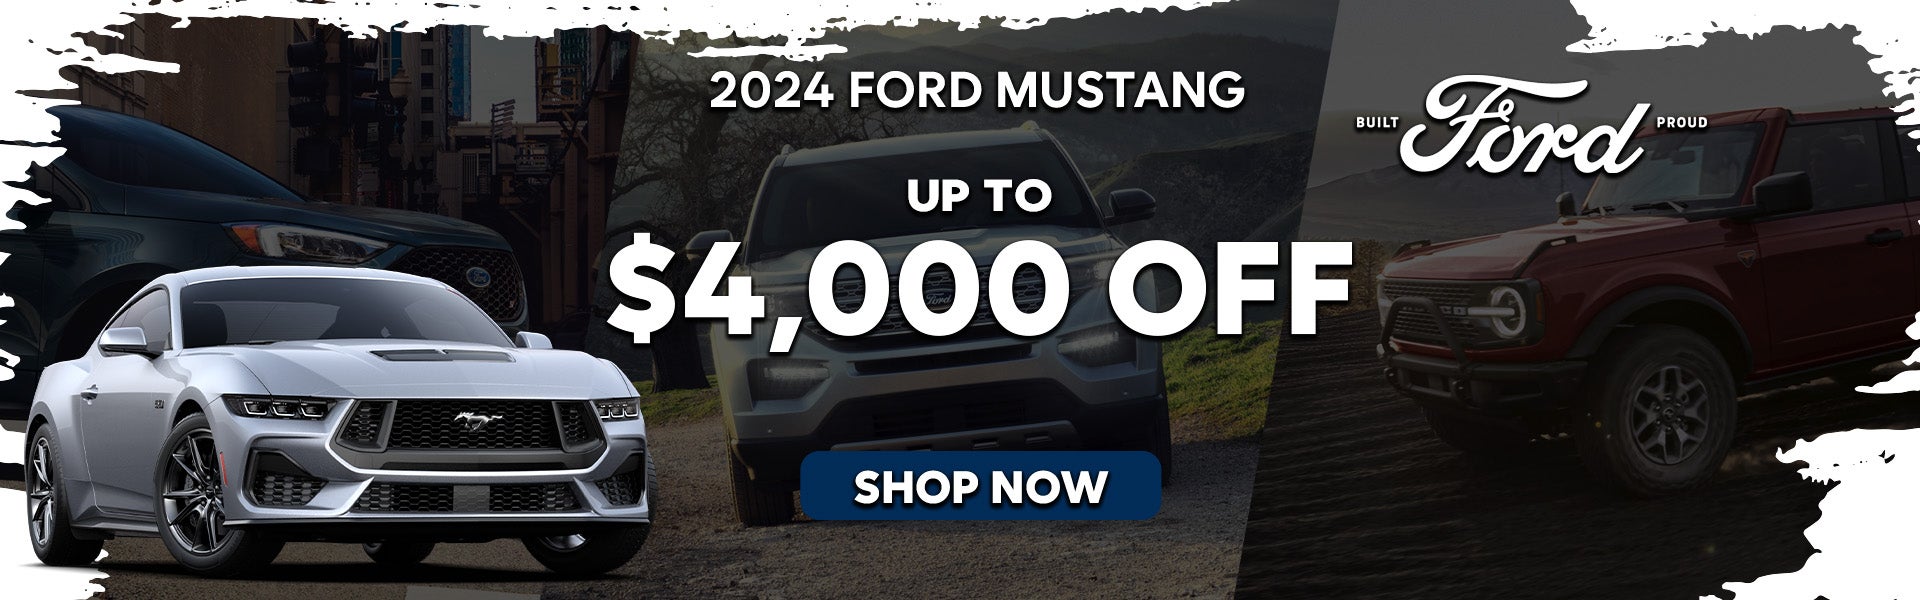 2024 Ford Mustang Special Offer